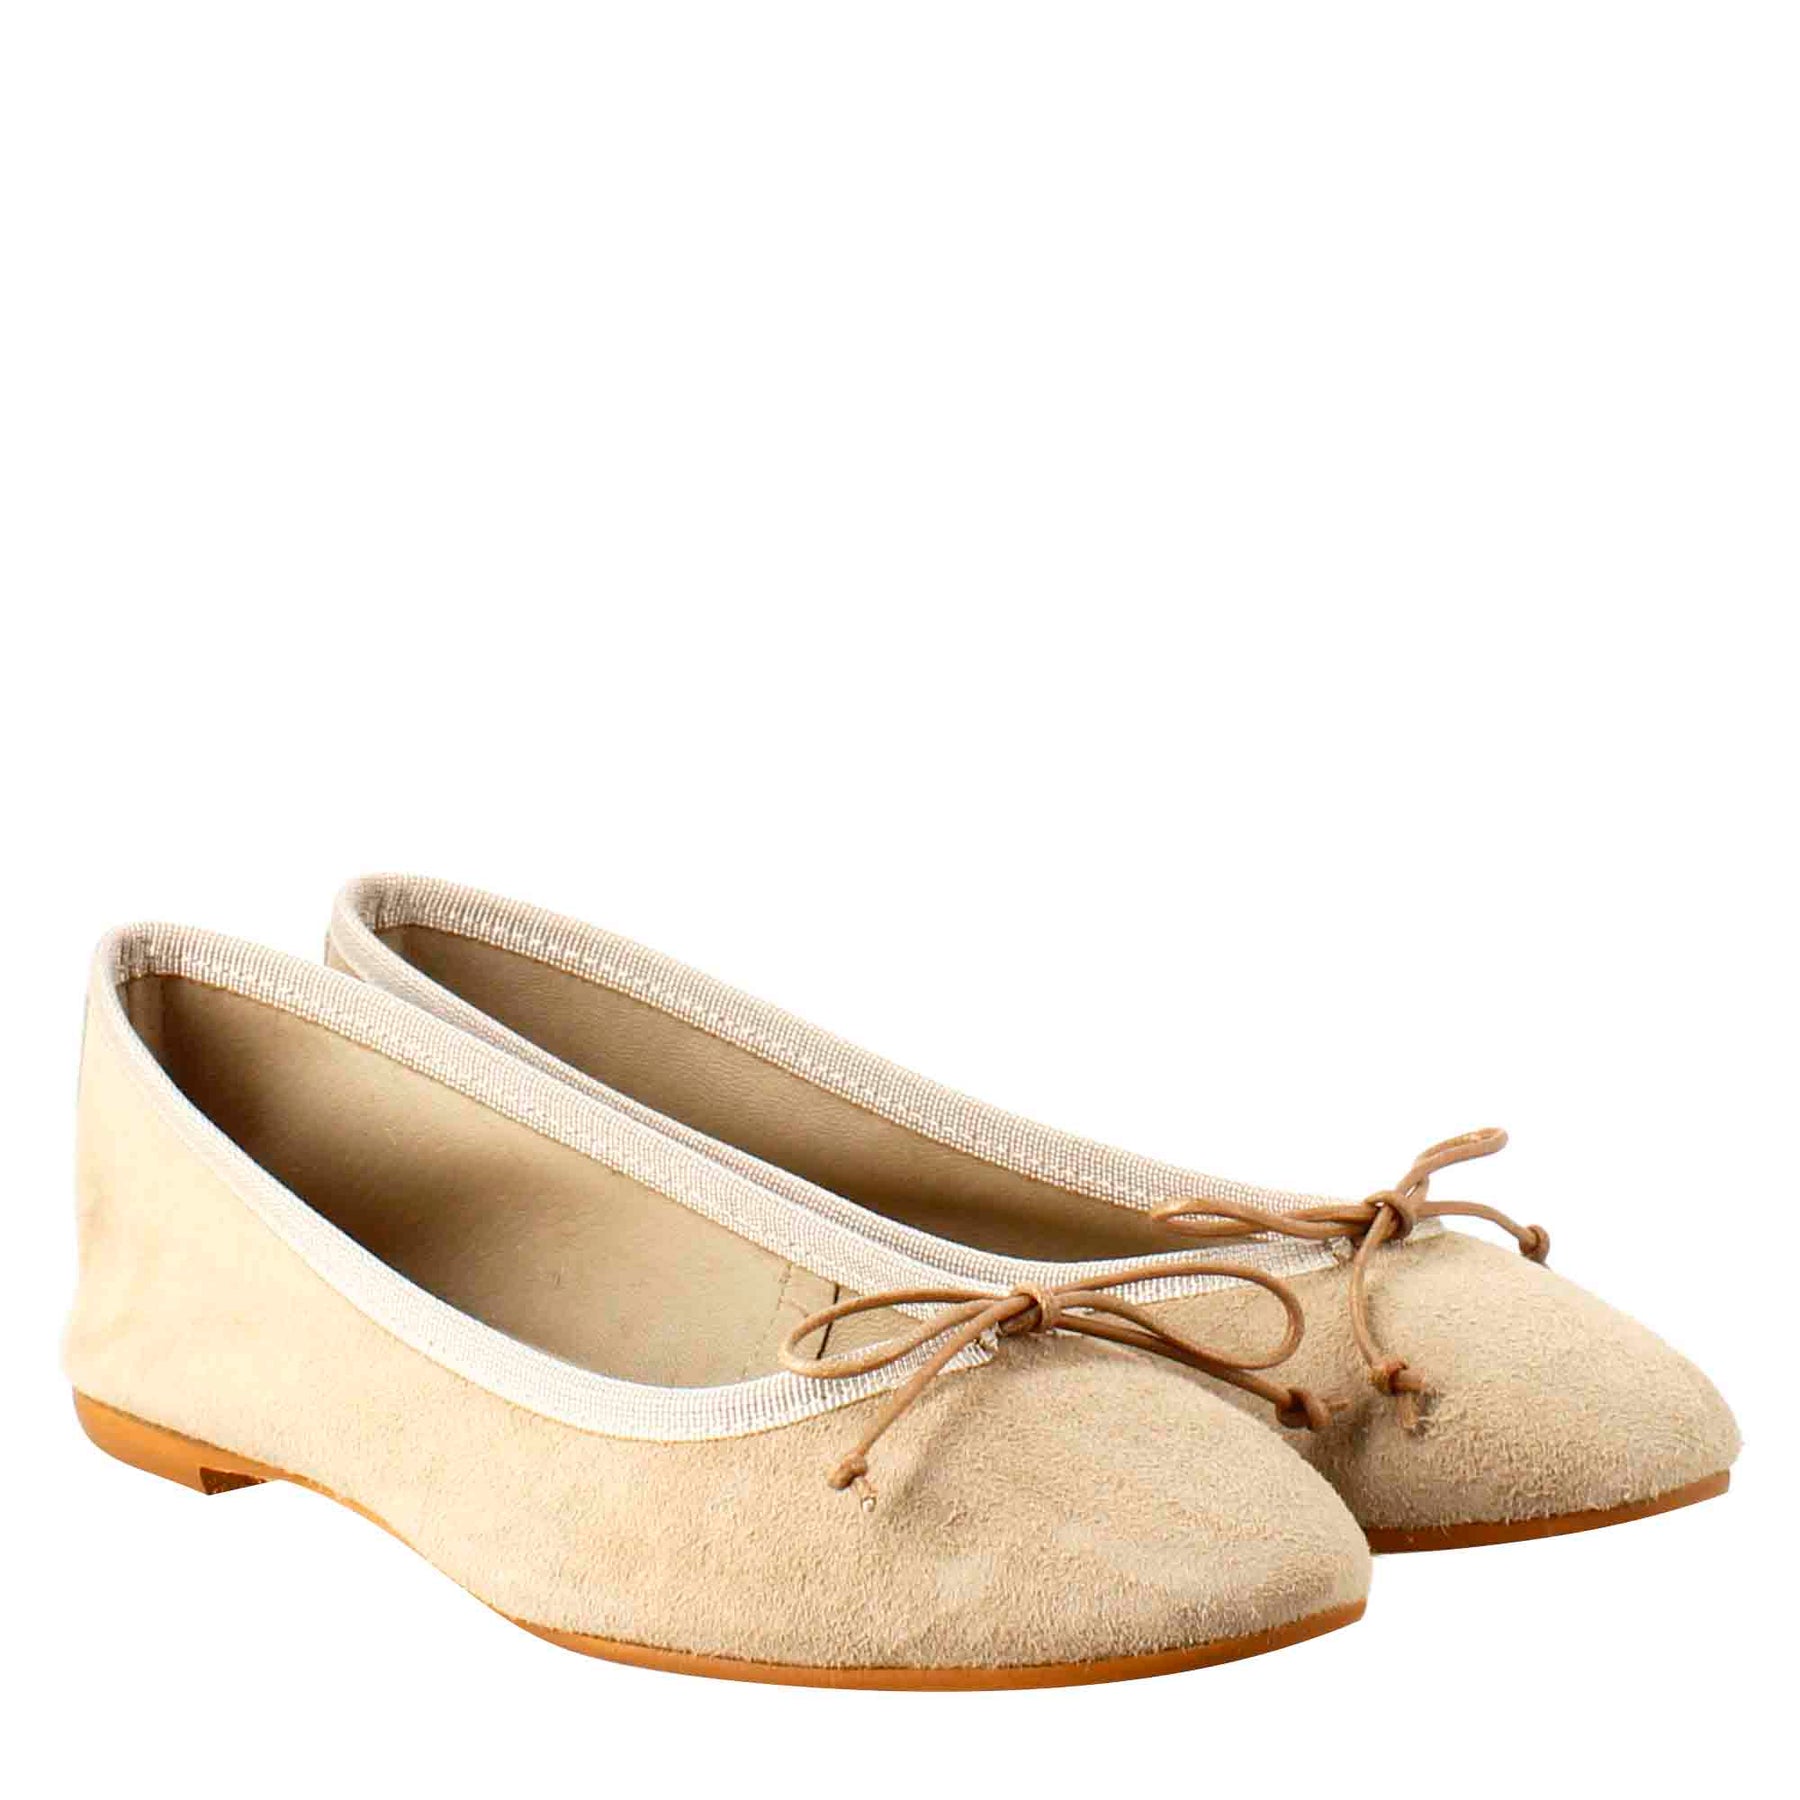 Women's light taupe suede ballet flats without lining